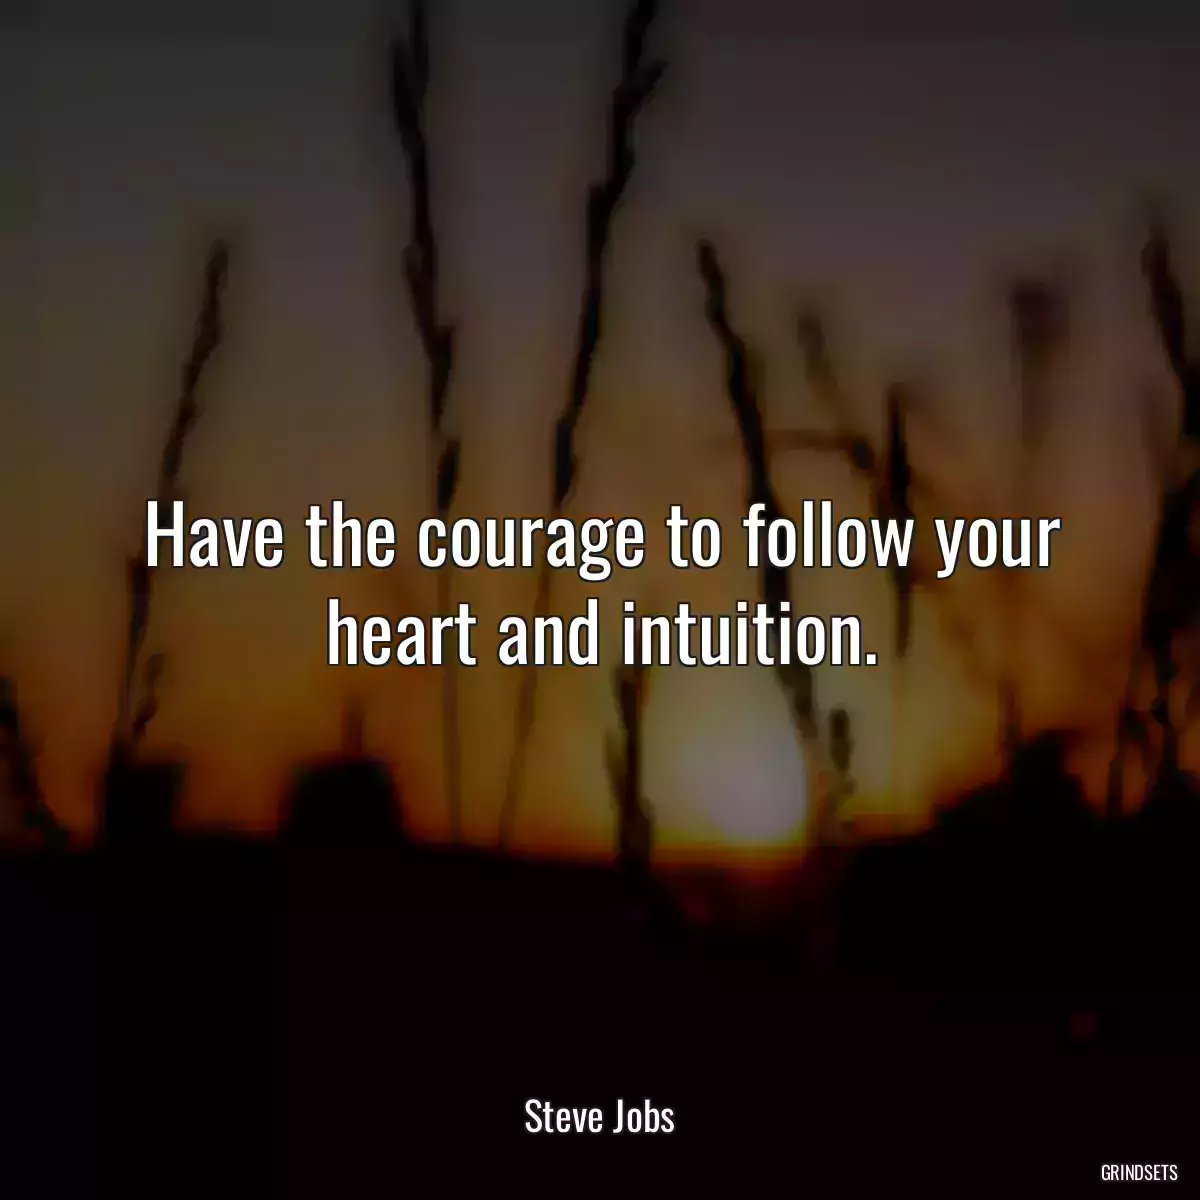 Have the courage to follow your heart and intuition.